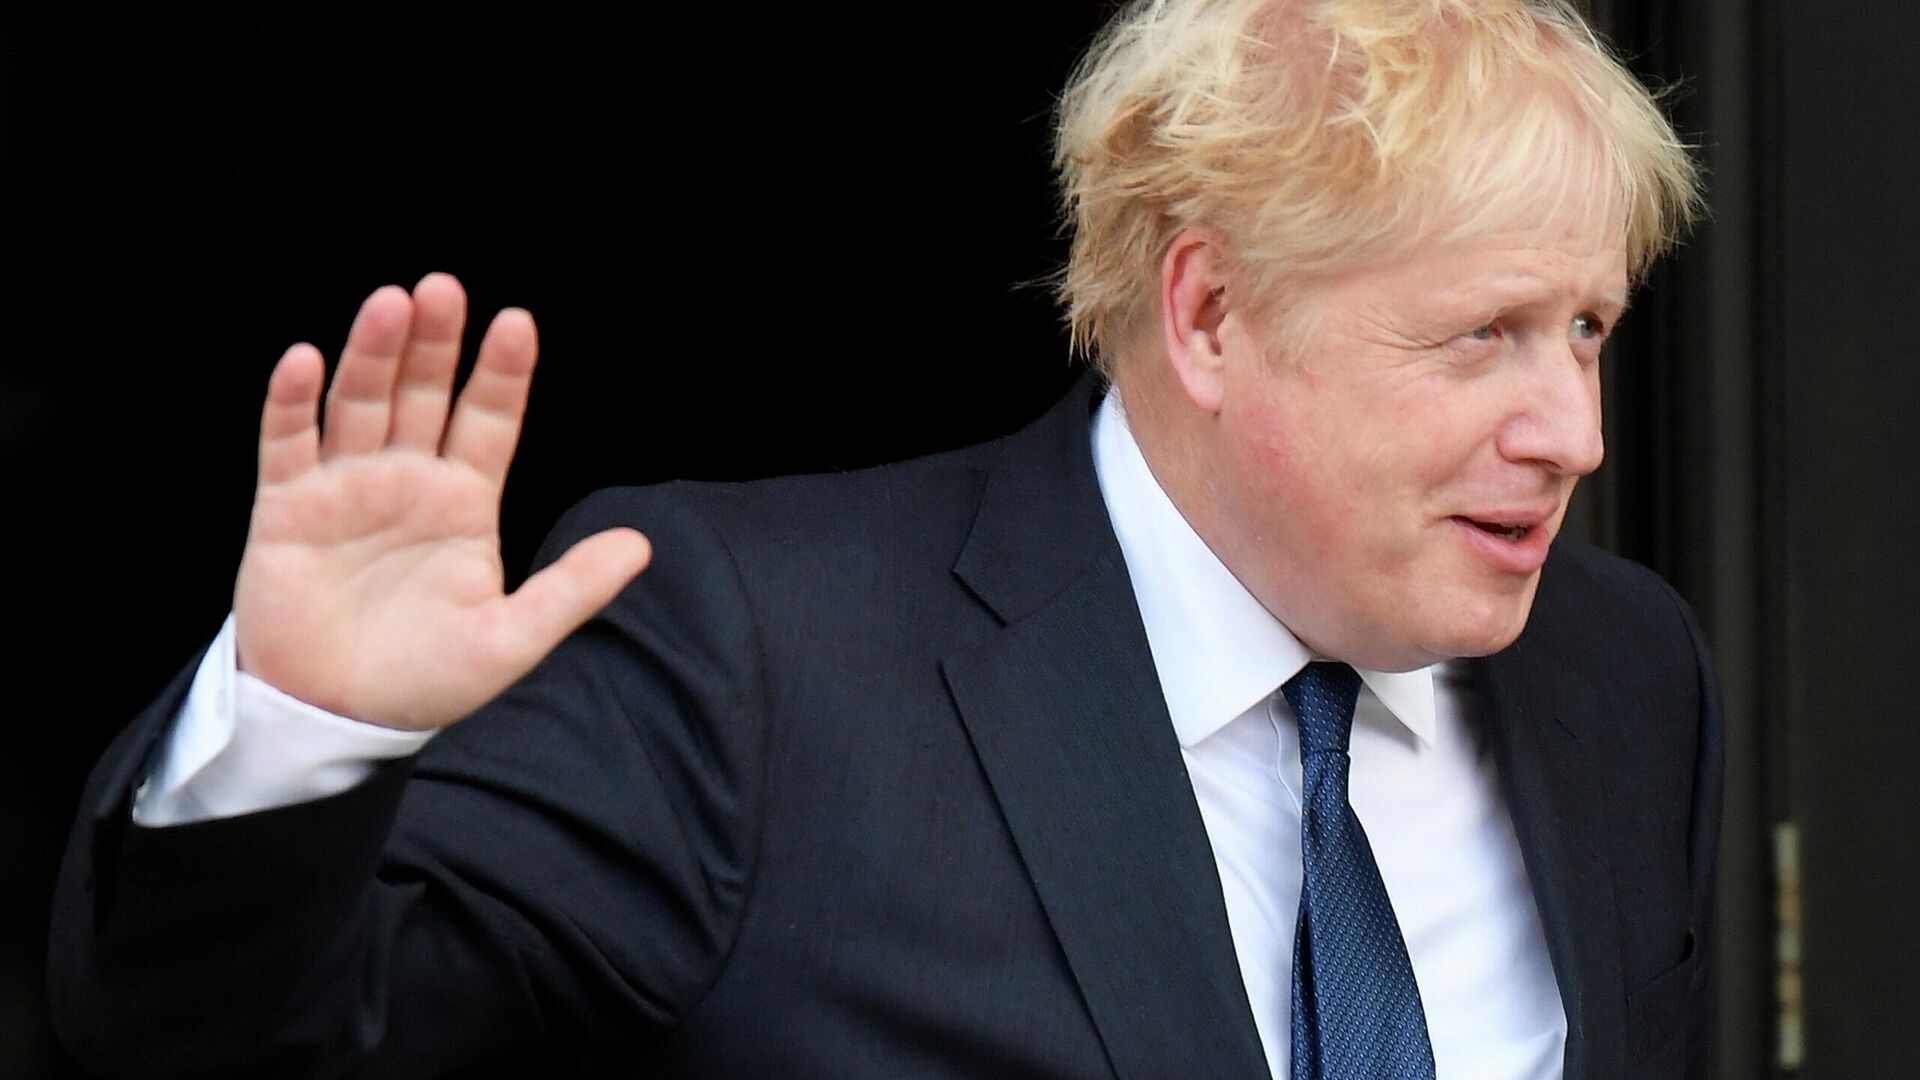 Britain's Prime Minister Boris Johnson gestures as he walks out of his hotel during the annual Conservative Party conference, in Manchester, Britain, October 3, 2021 - Sputnik International, 1920, 05.10.2021